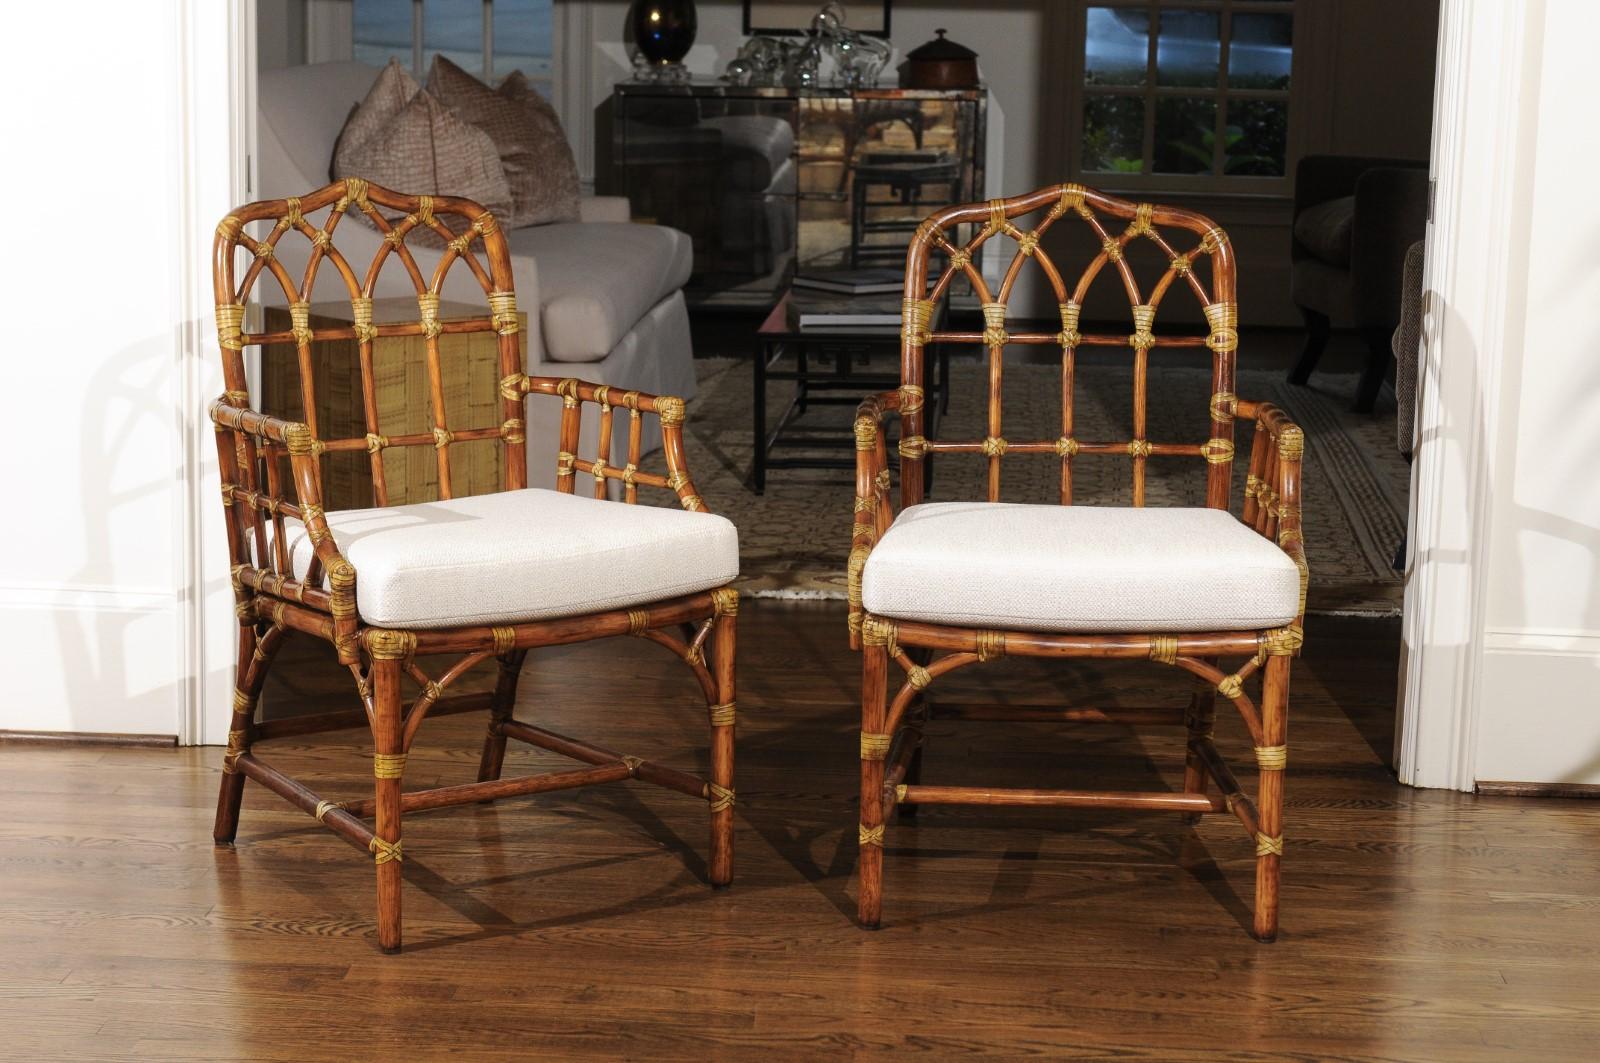 A radiant restored set of eight difficult to find arm dining chairs by McGuire, circa 1970. Stunning expertly crafted rattan and cane construction with an exquisite Cathedral back detail. Handsome accent bindings in the Maker's iconic trademark